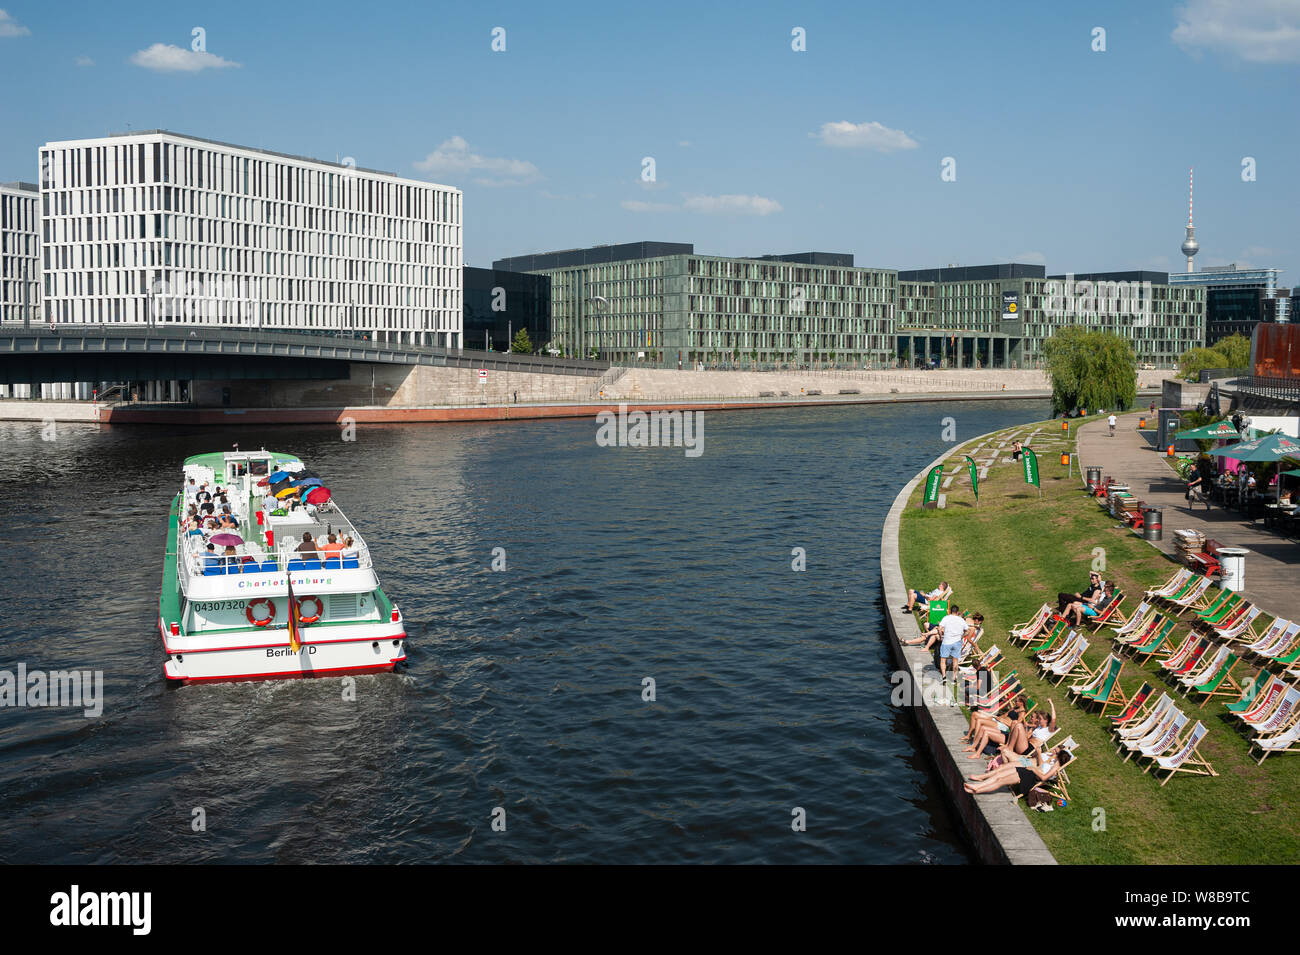 12.06.2019, Berlin, Germany, Europe - Beach bar 'Capital Beach' on the Ludwig-Erhard-Ufer riverbank along the Spree River in the government district. Stock Photo